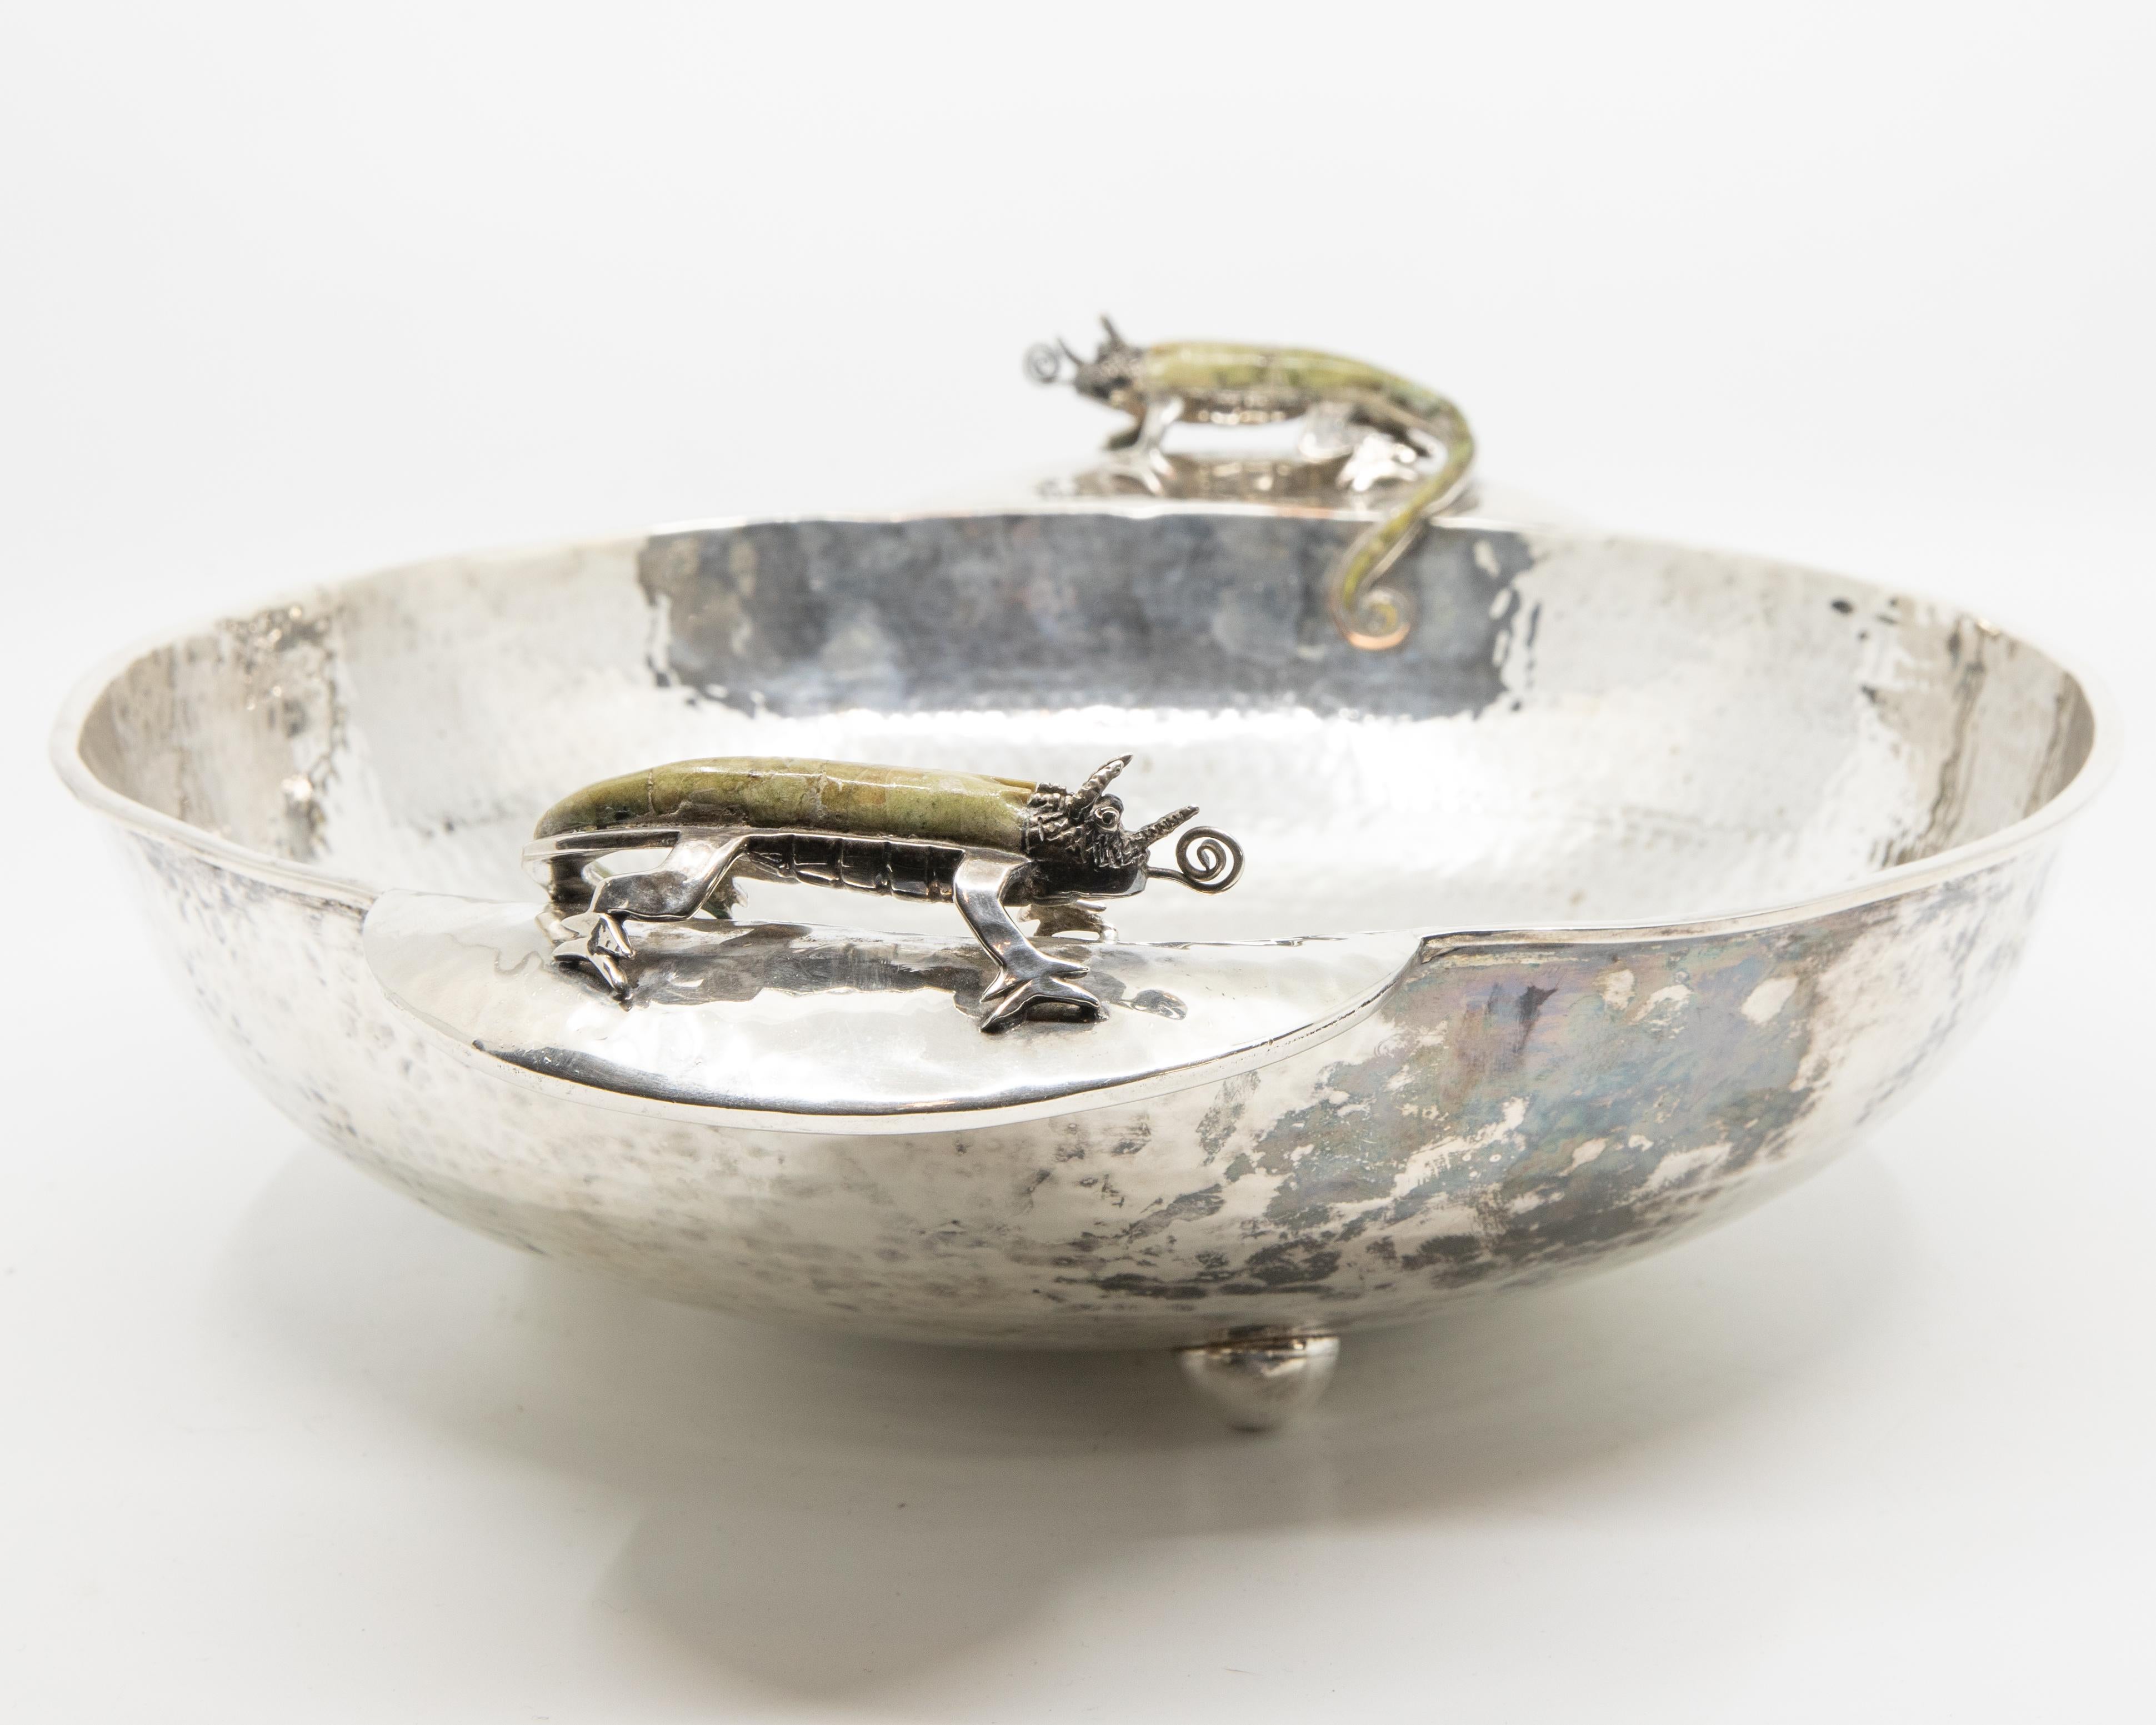 Mexican Wolmar Castillo circa 1960s Hand-Hammered Silver Plated Copper Bowl